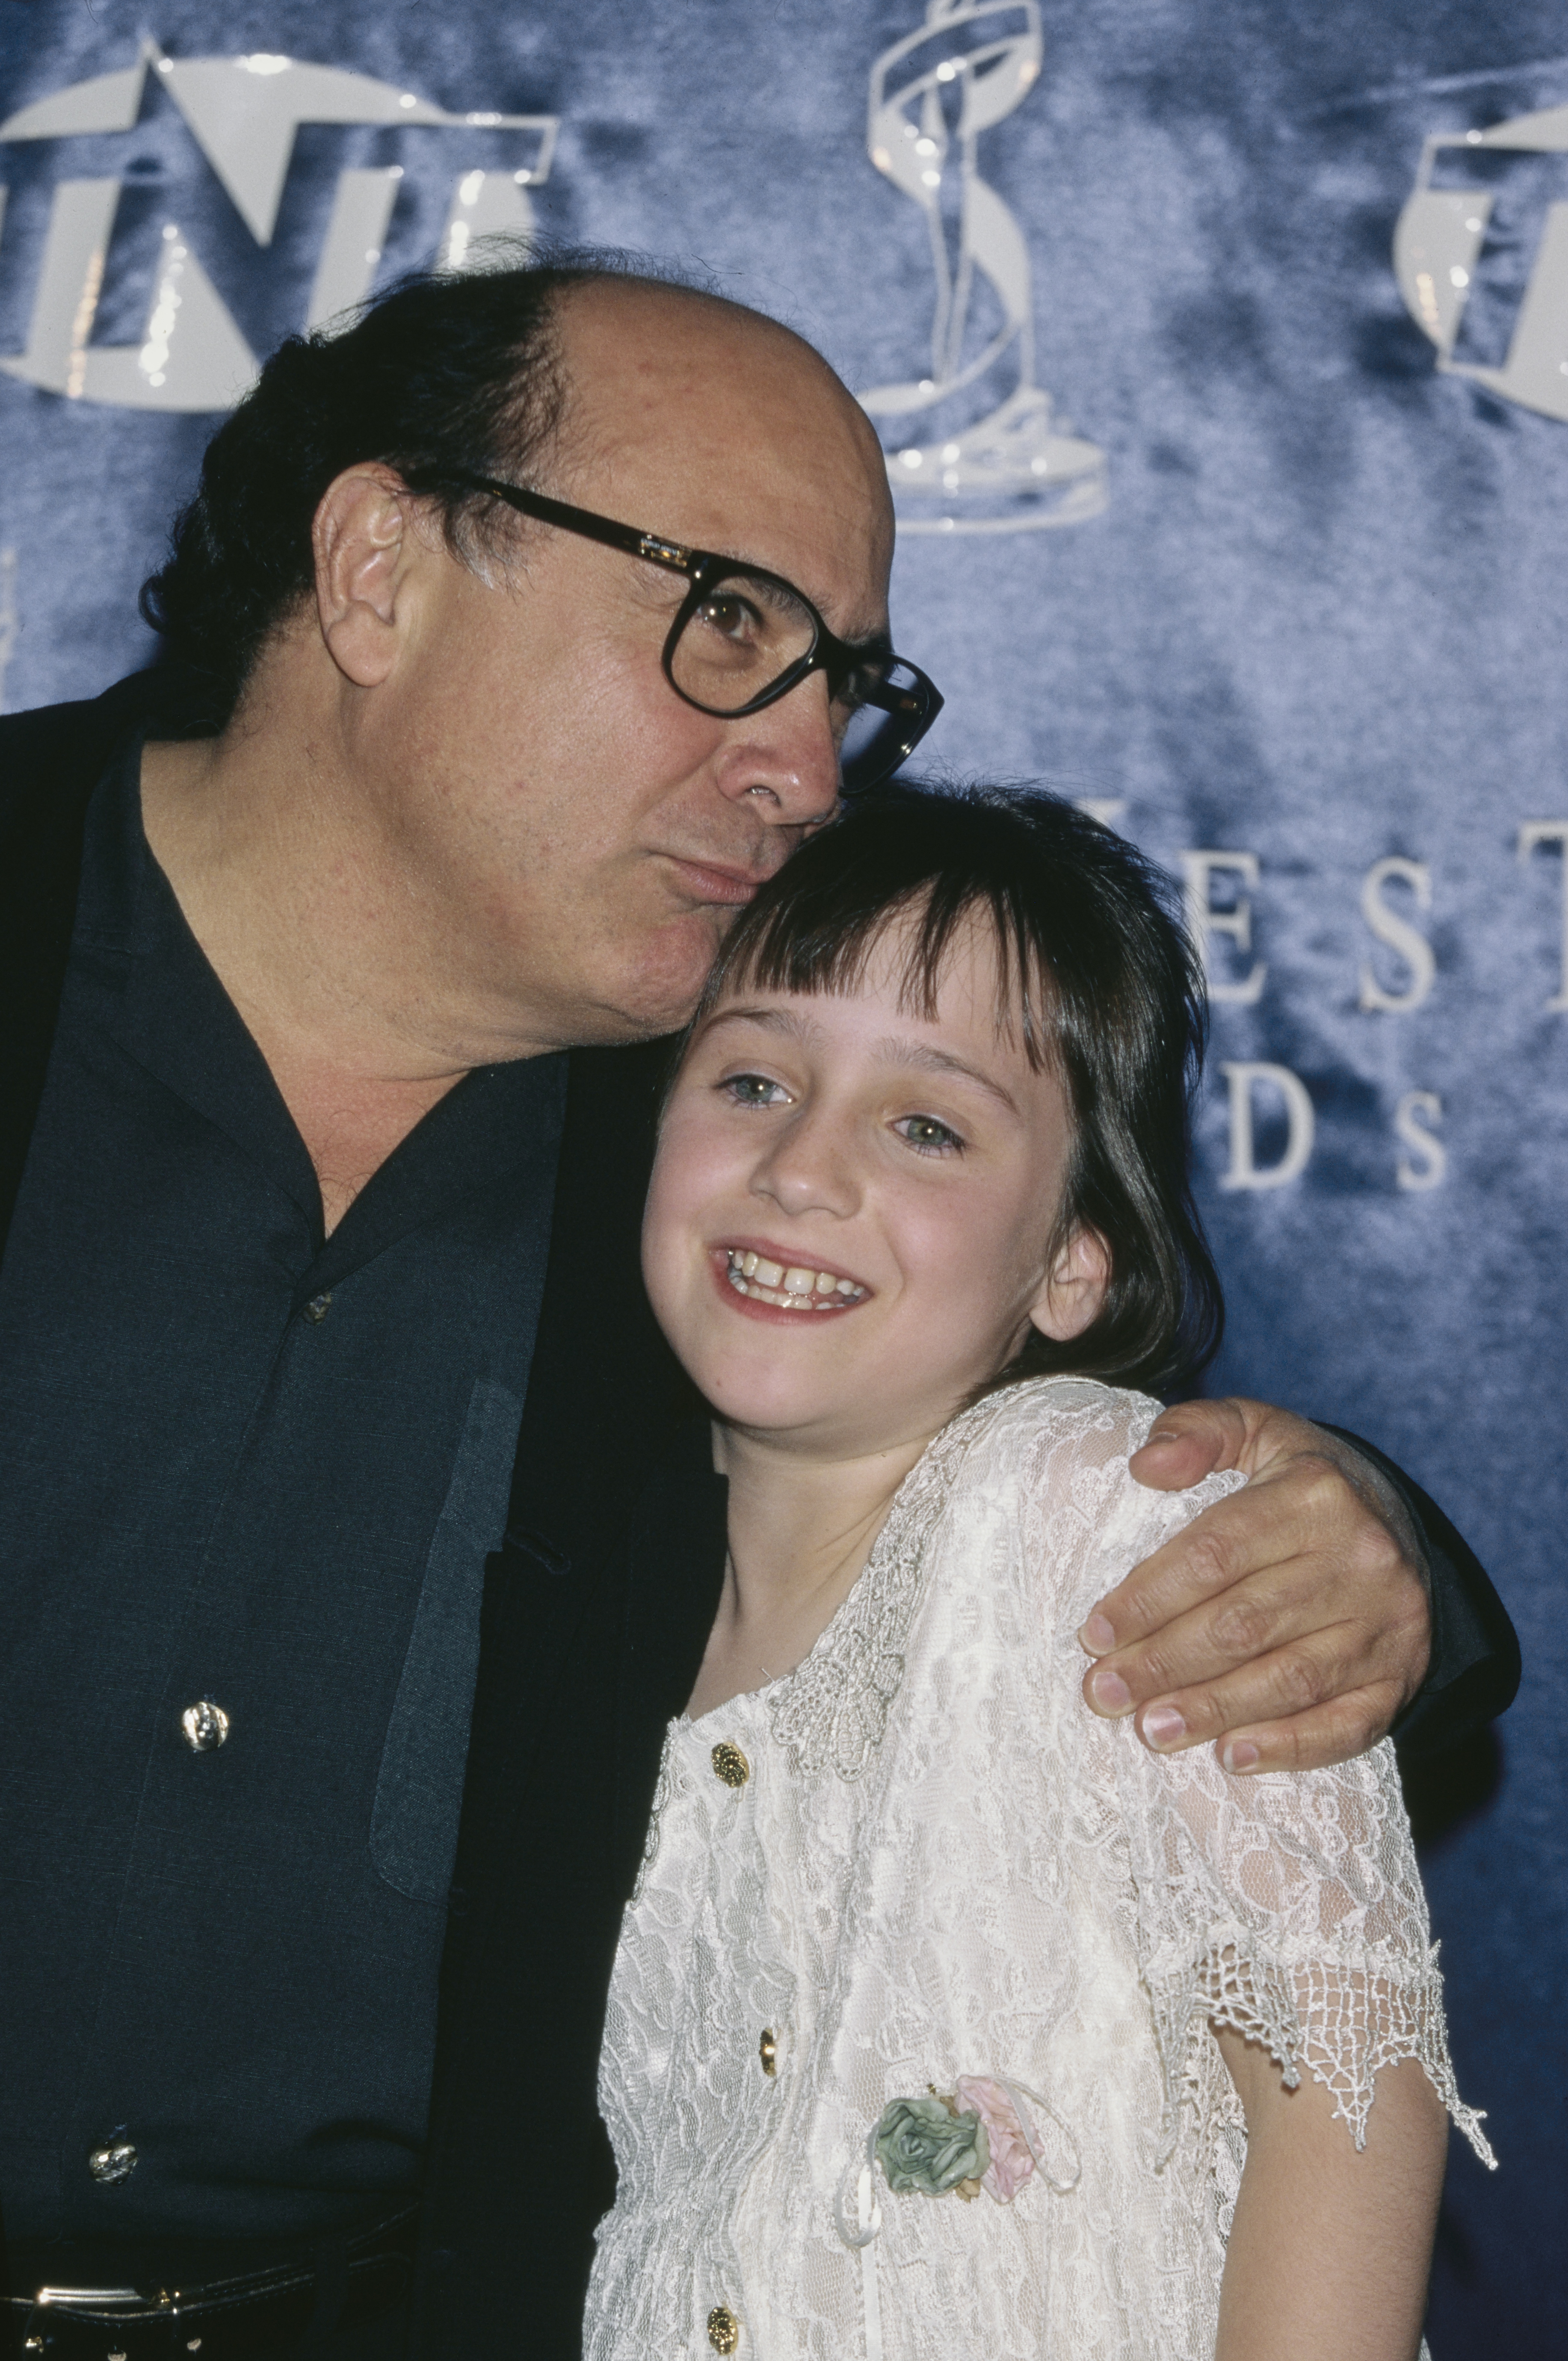 Danny DeVito and Mara Wilson attend and present at the ShoWest Awards, held at the MGM Grand Hotel in Las Vegas, Nevada, March 6, 1997. | Source: